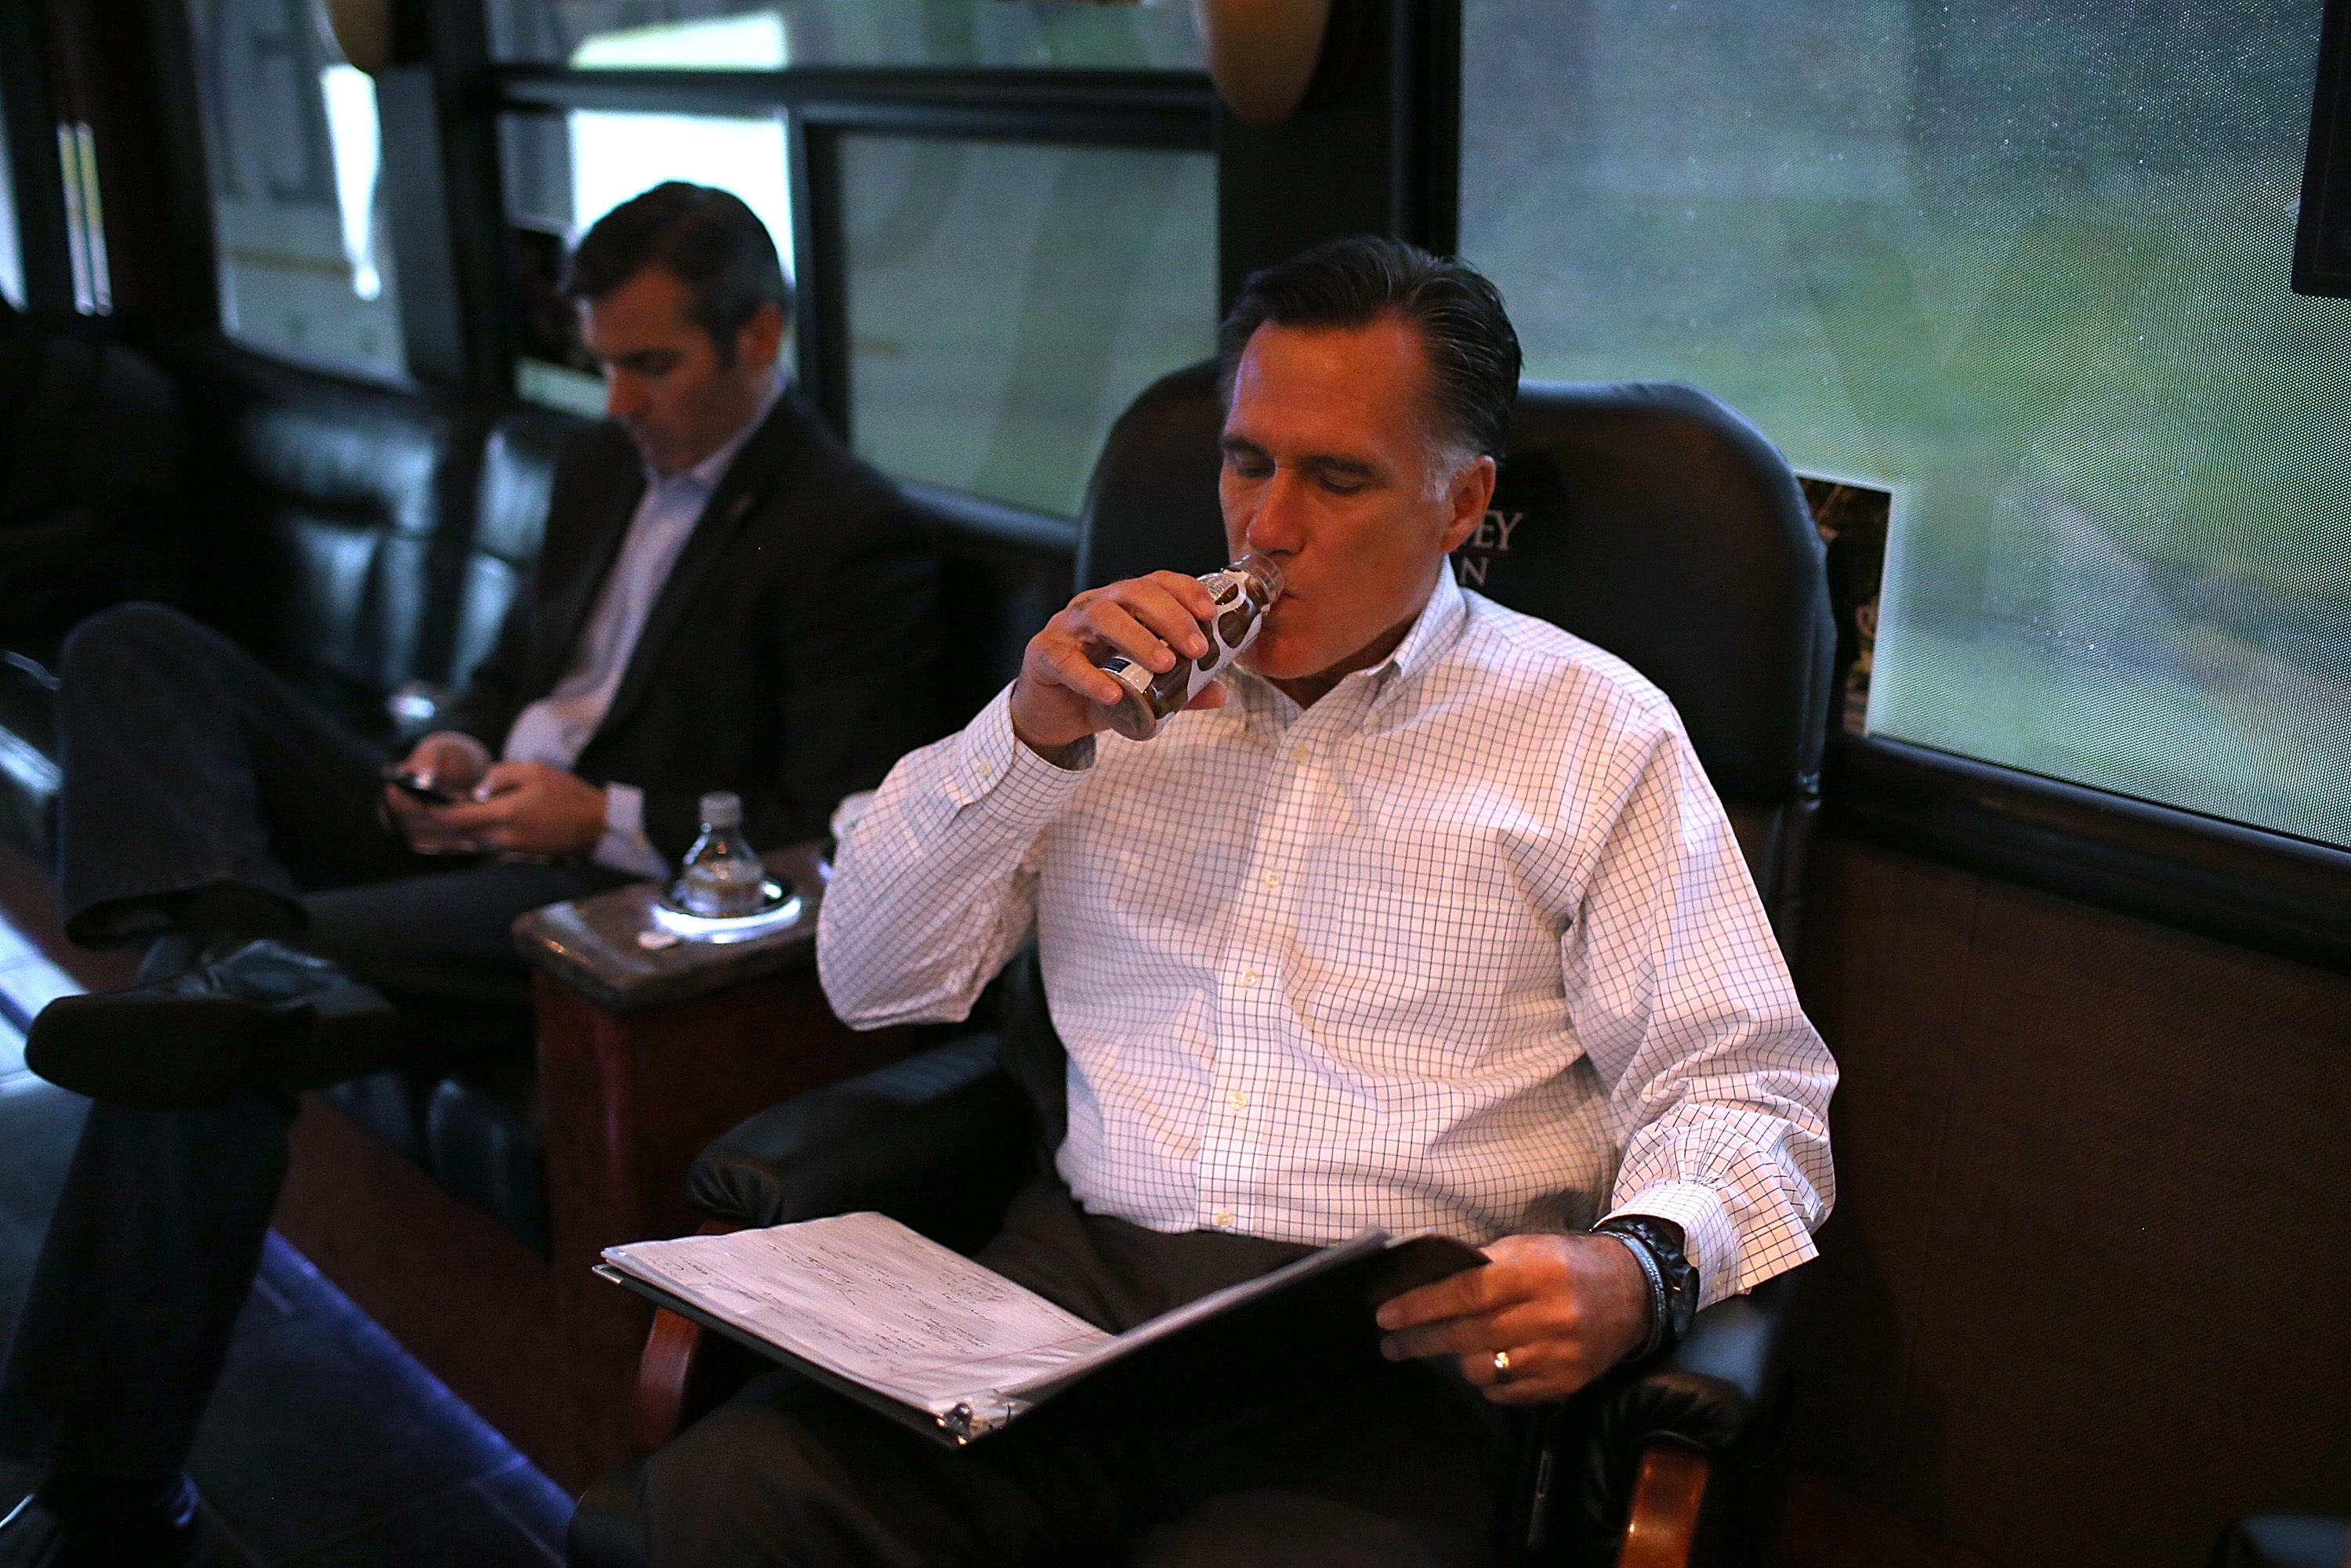 No, Mitt Romney, You Cant Drink Chocolate Milk Out of the Bottle During the Impeachment Trial